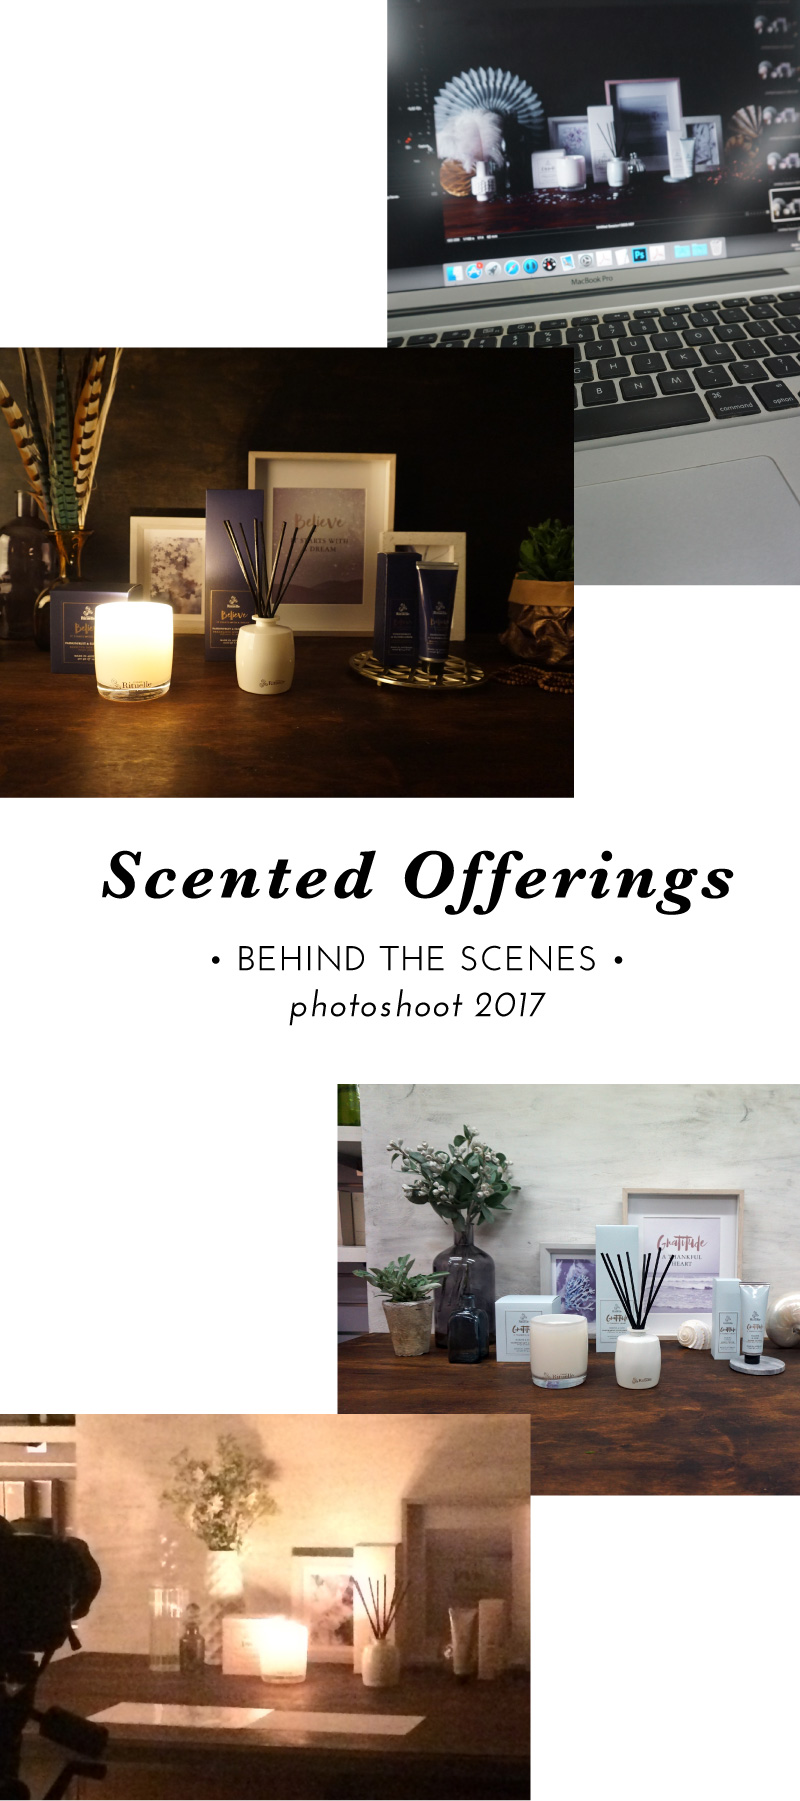 Scented Offerings photoshoot 2017